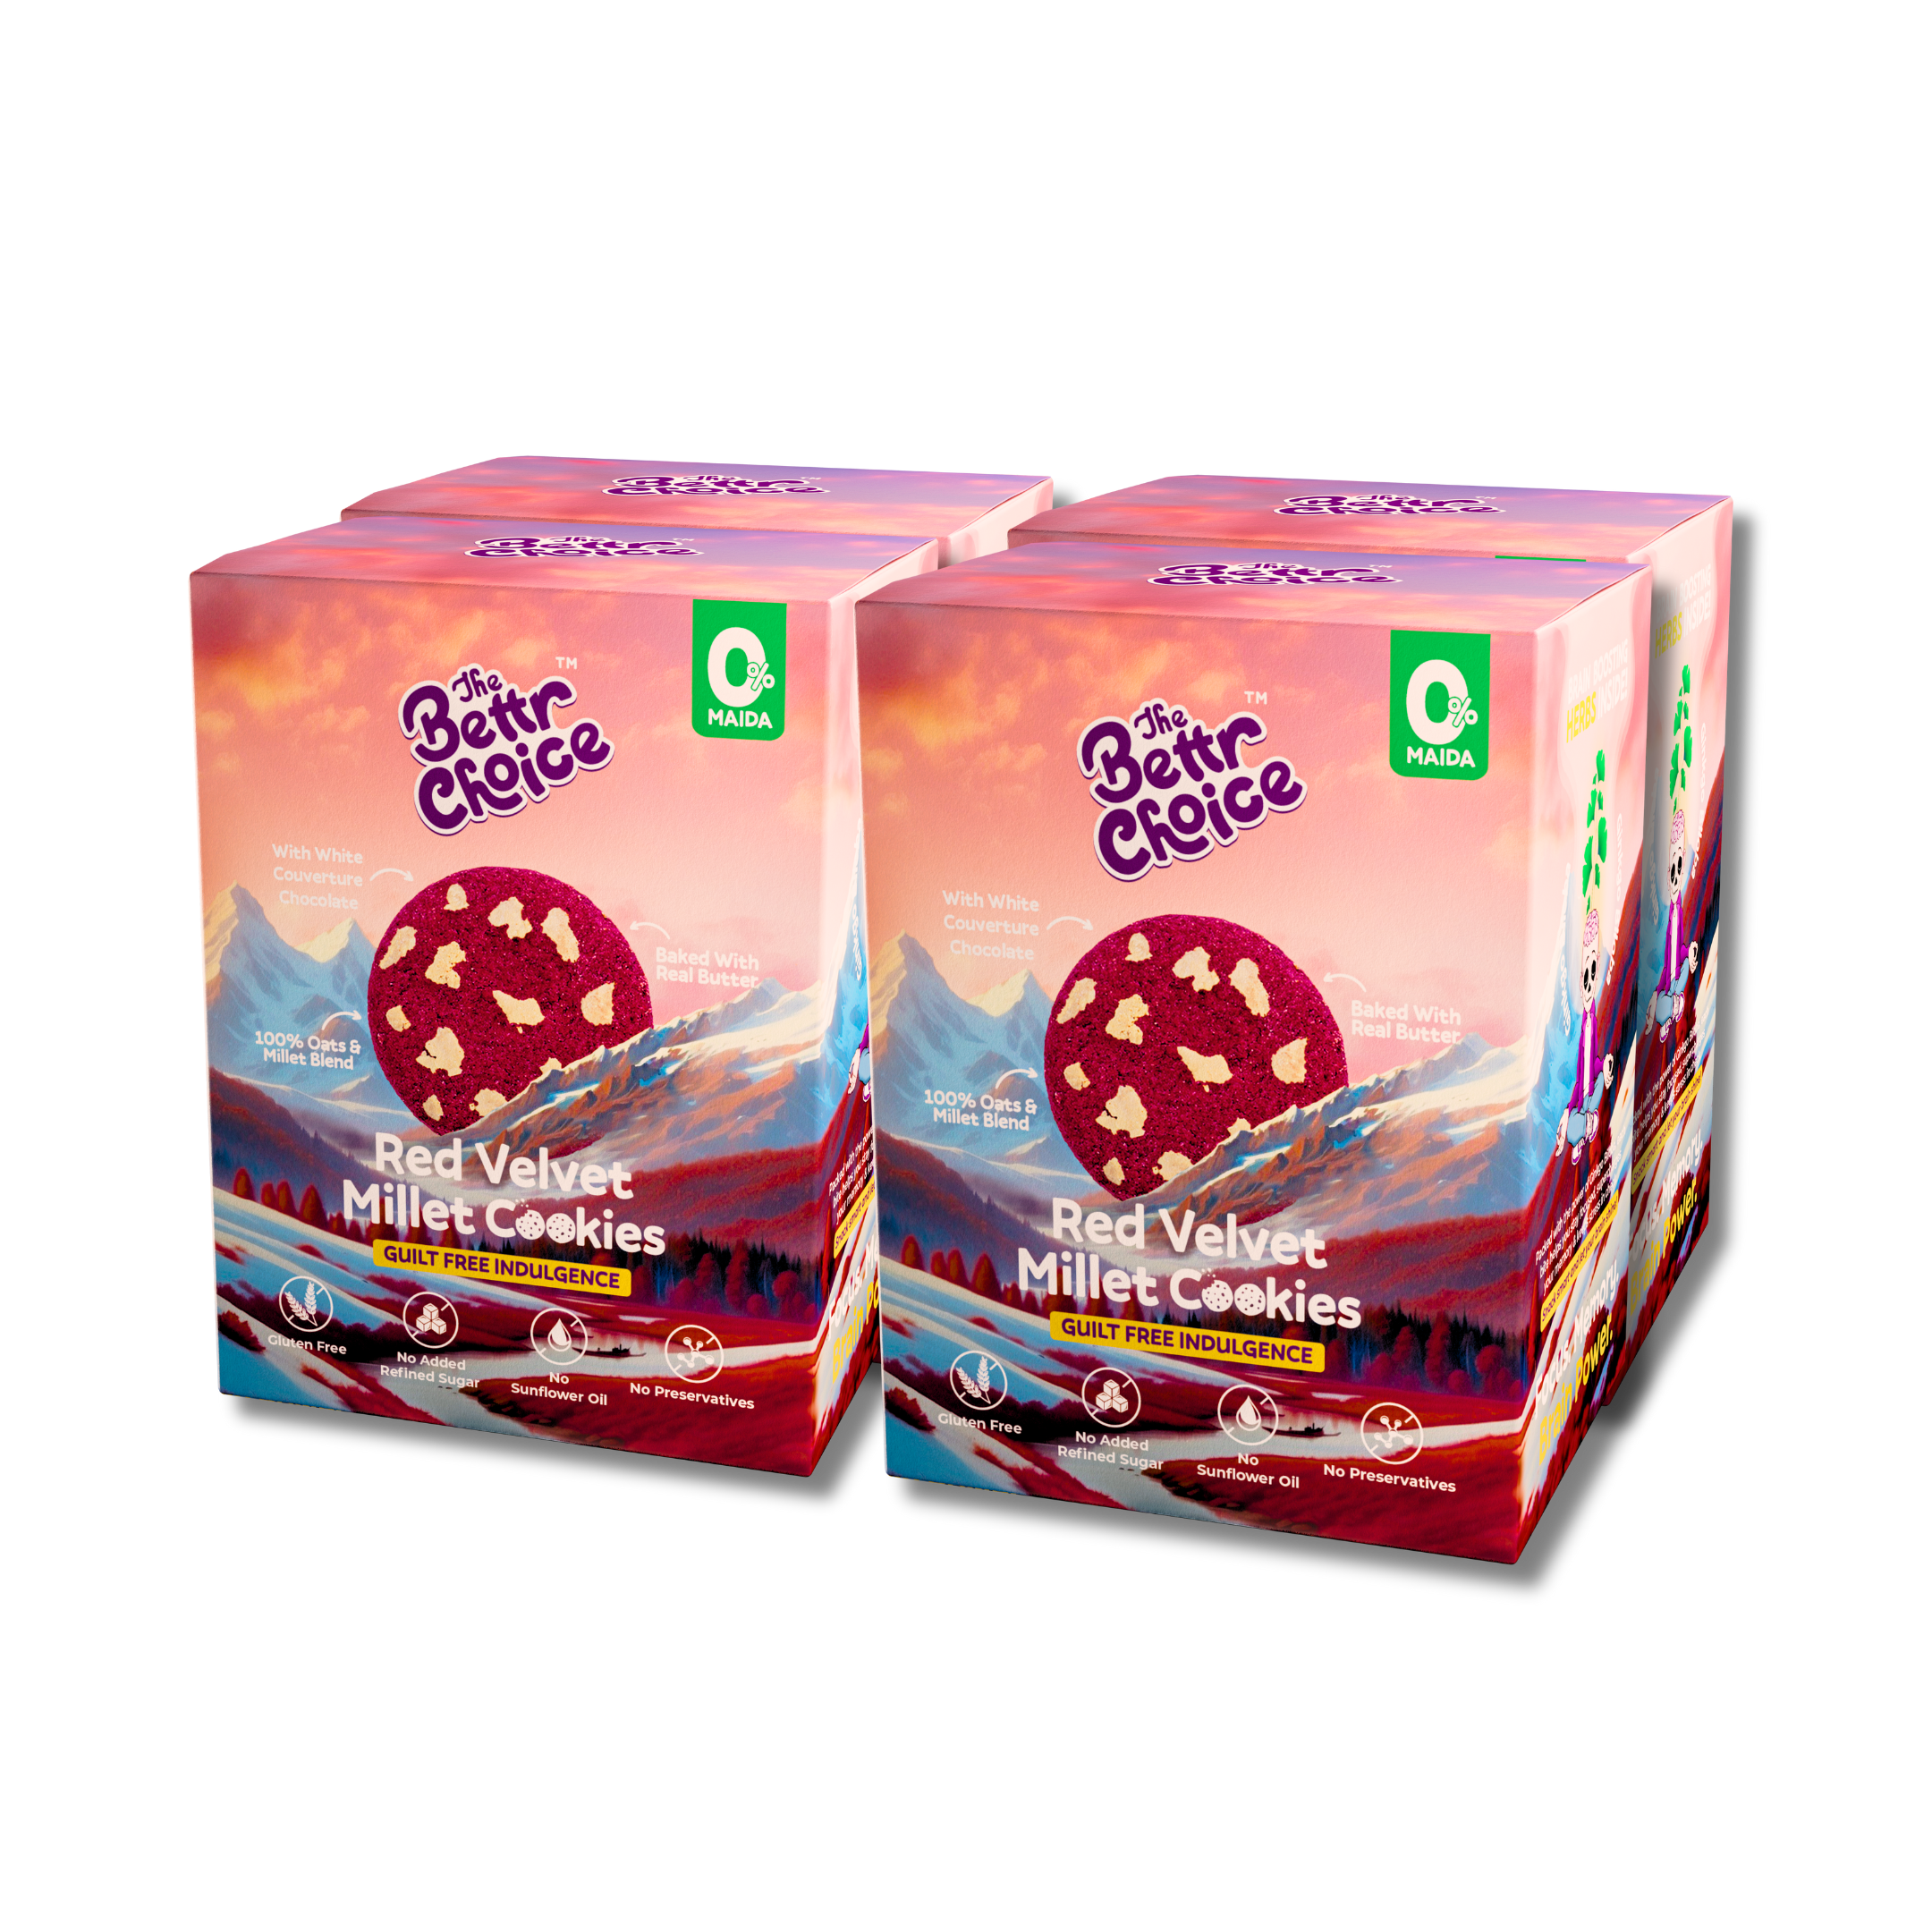 The Bettr Choice Red Velvet Millet Cookies: 100% Whole Grain Blend (Ragi & Oats), Natural Butter, Beetroot Powder, Organic Jaggery, Ginkgo Biloba, No Added Refined Sugar - Healthy Snack - 4 Pack